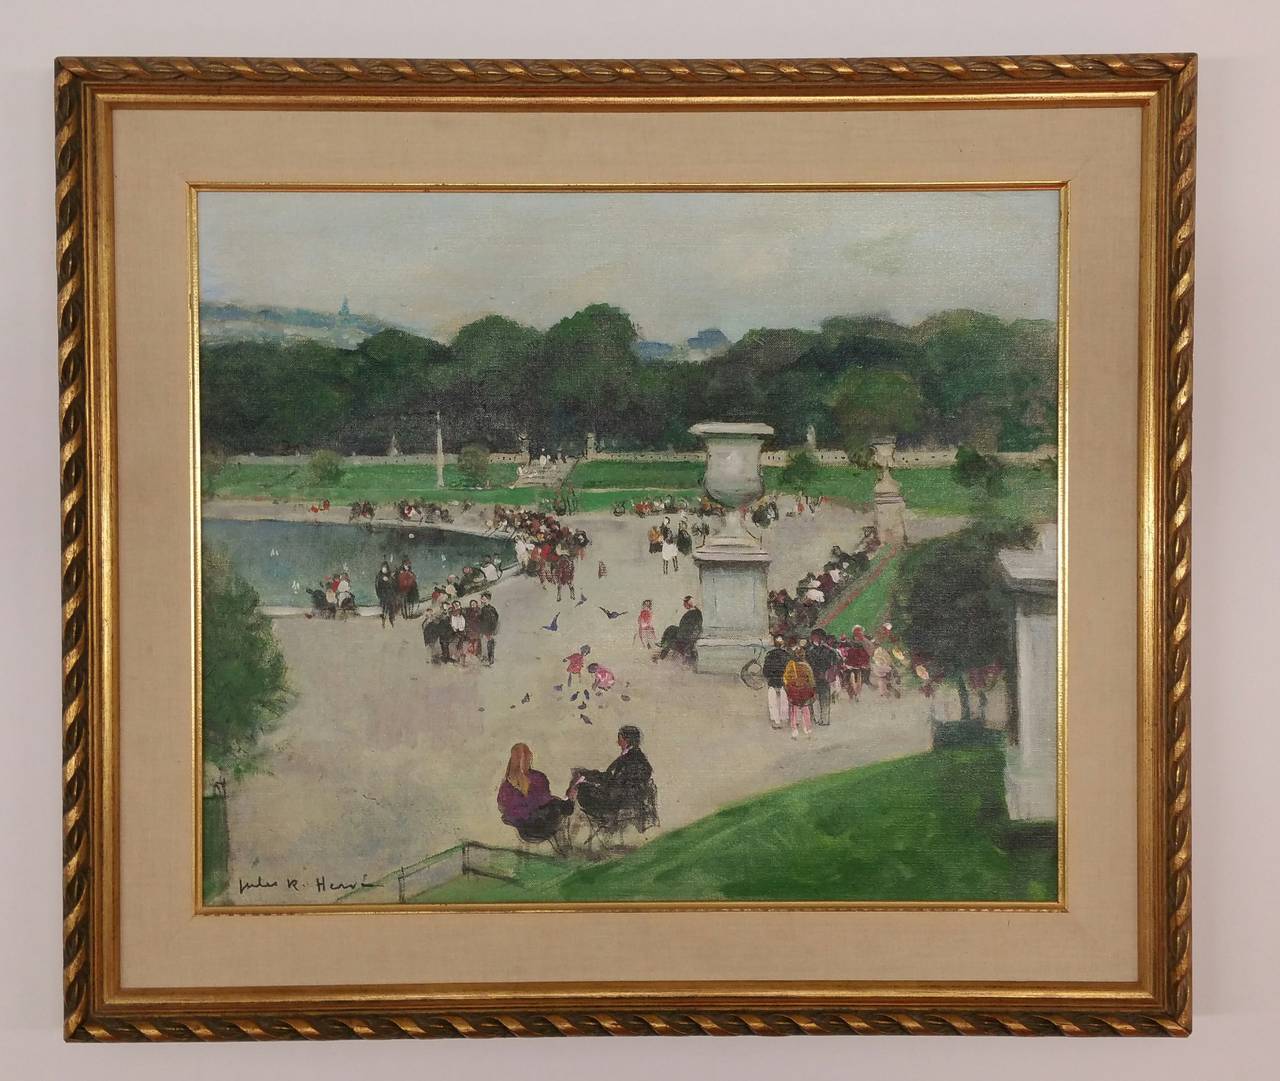 By the Pond in Paris, France - Painting by Jules René Hervé